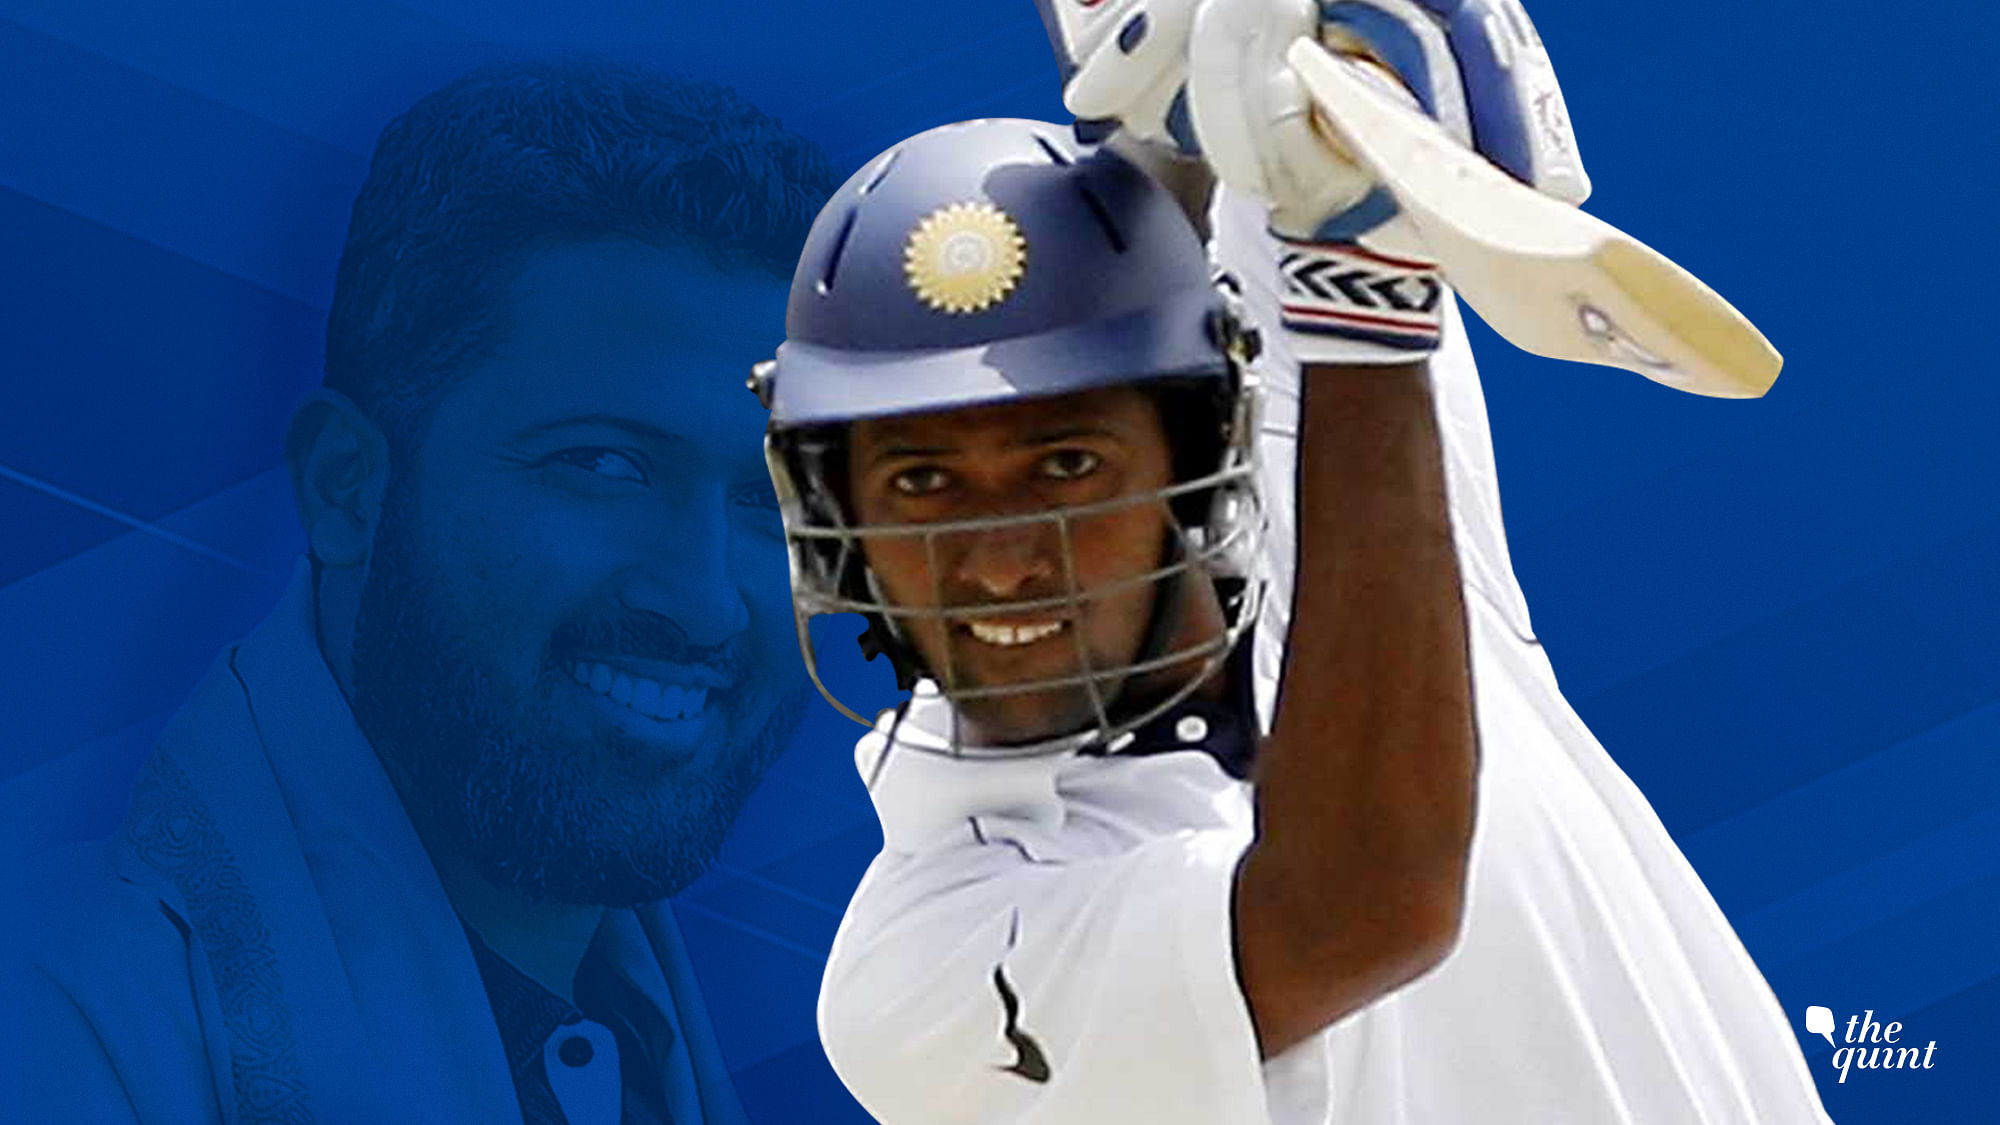 Wasim Jaffer has announced his retirement from all forms of cricket.